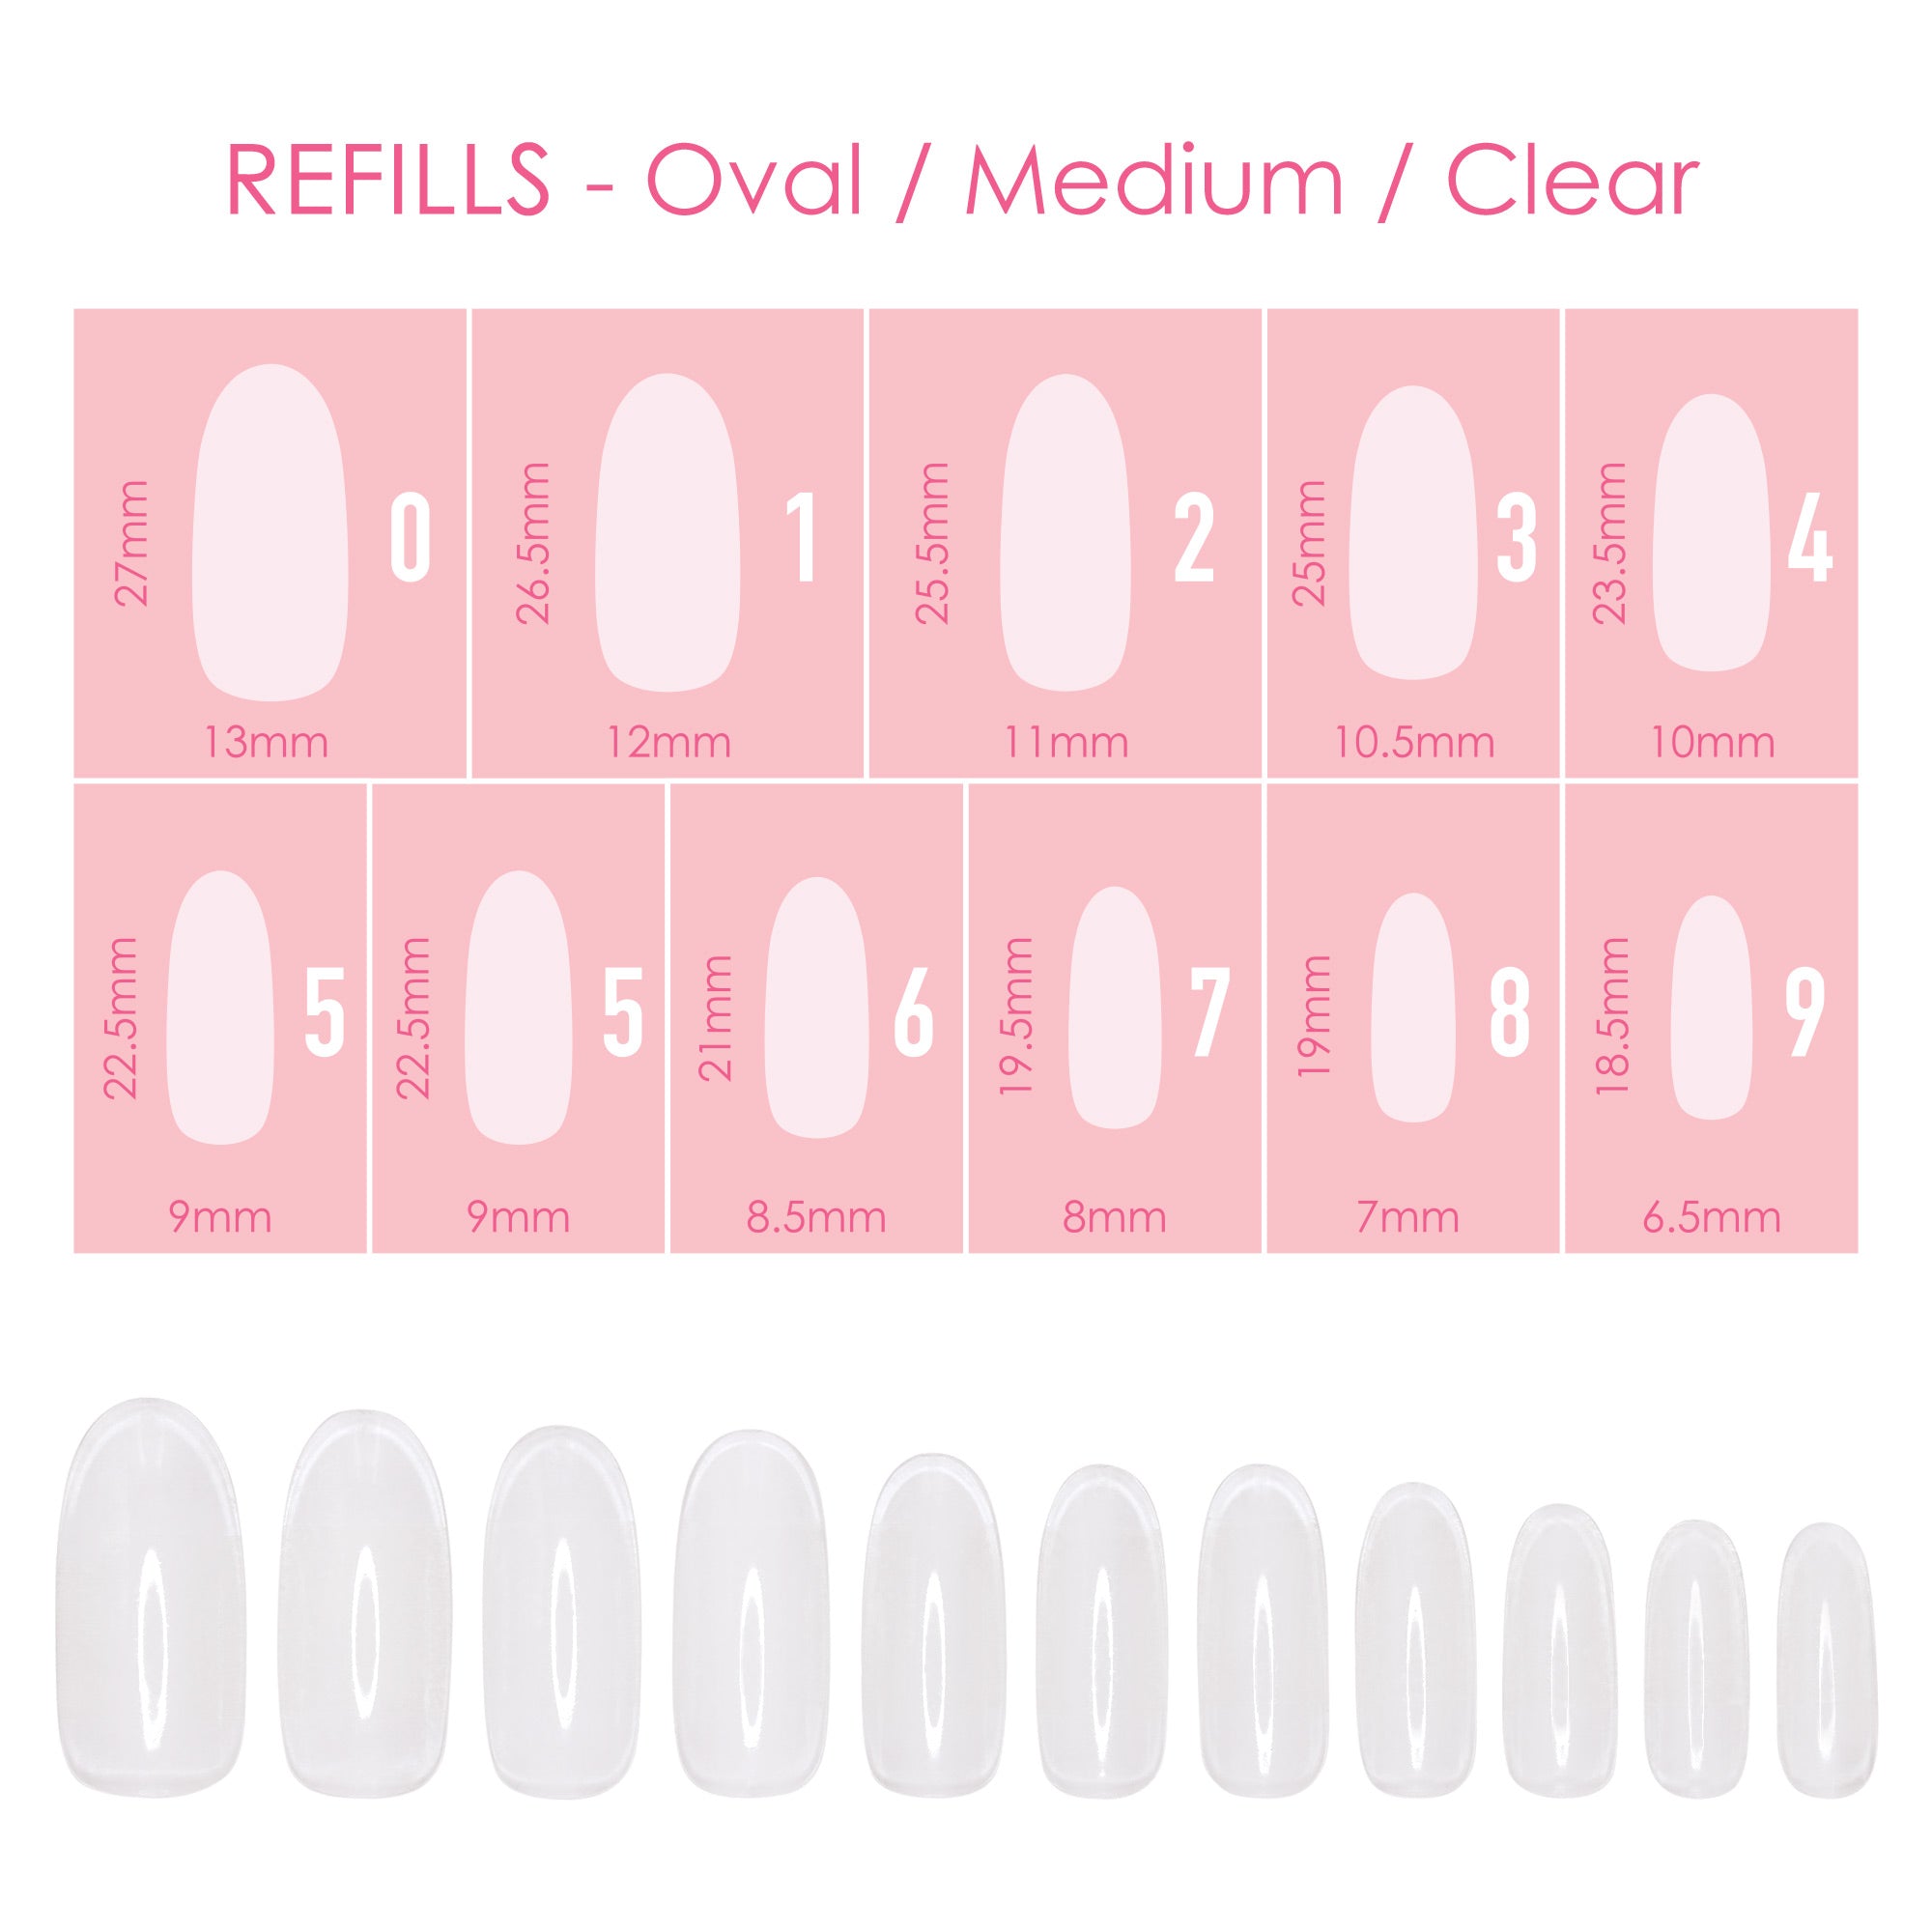 Charme Gel Extension Tips Refill / Oval / Medium / Clear